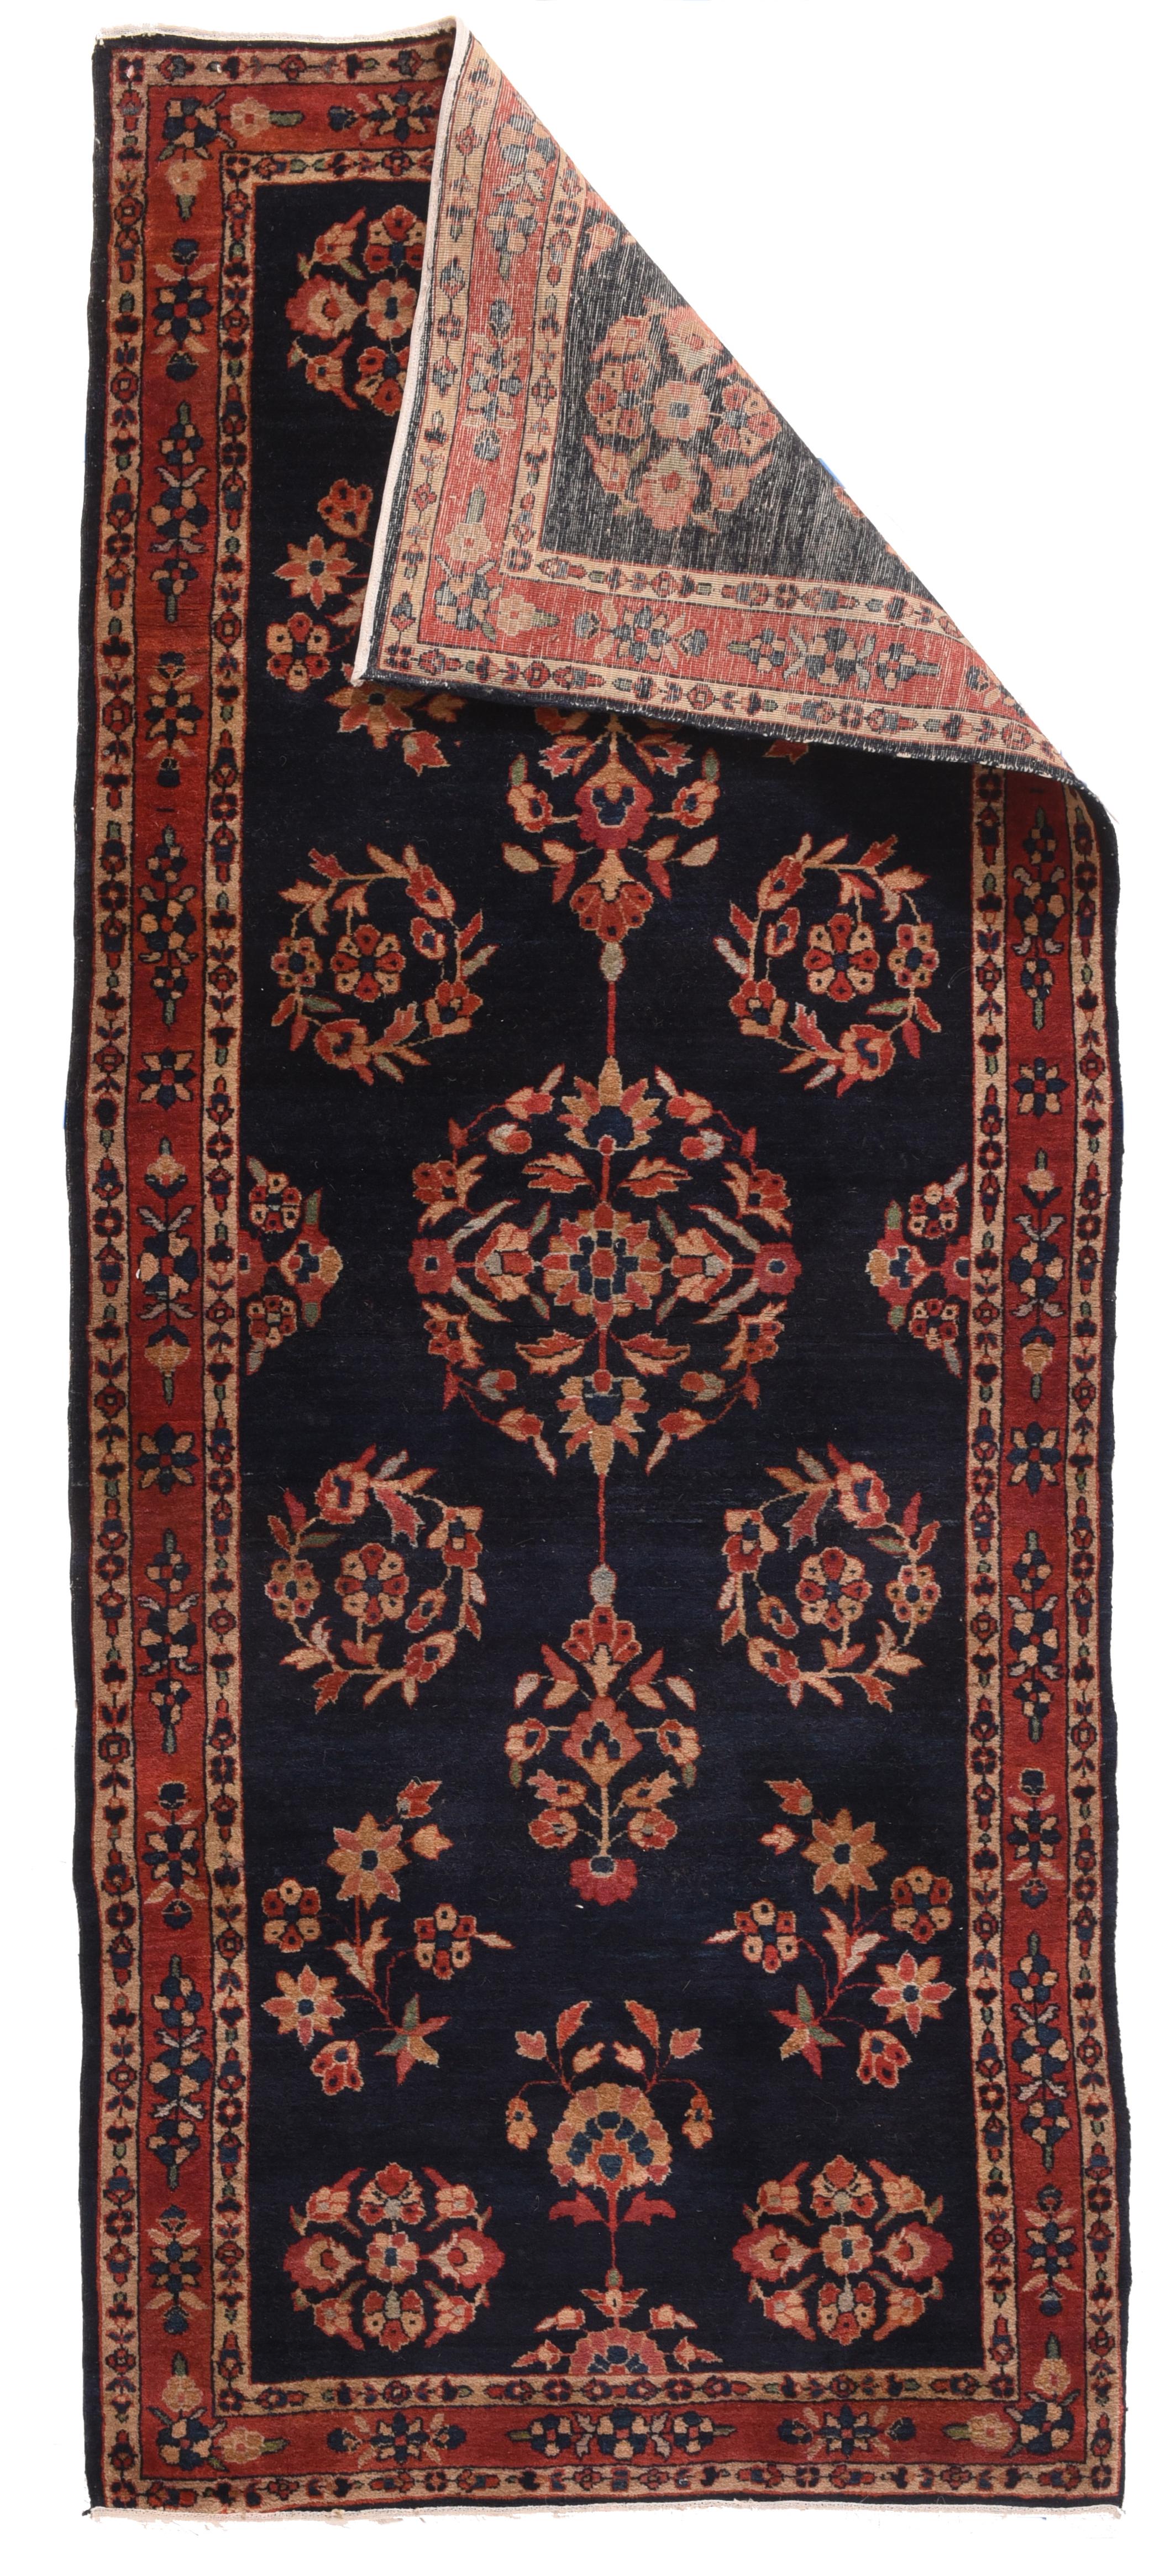 Antique Navy Mohajeran Sarouk Rug 2'9'' x 6'8''. Perhaps Mohajeran village which was famous for very high quality, blue ground Sarouk style rugs in the Interwar period. The intense navy indigo field show spaciously positioned rosettes, wreaths,